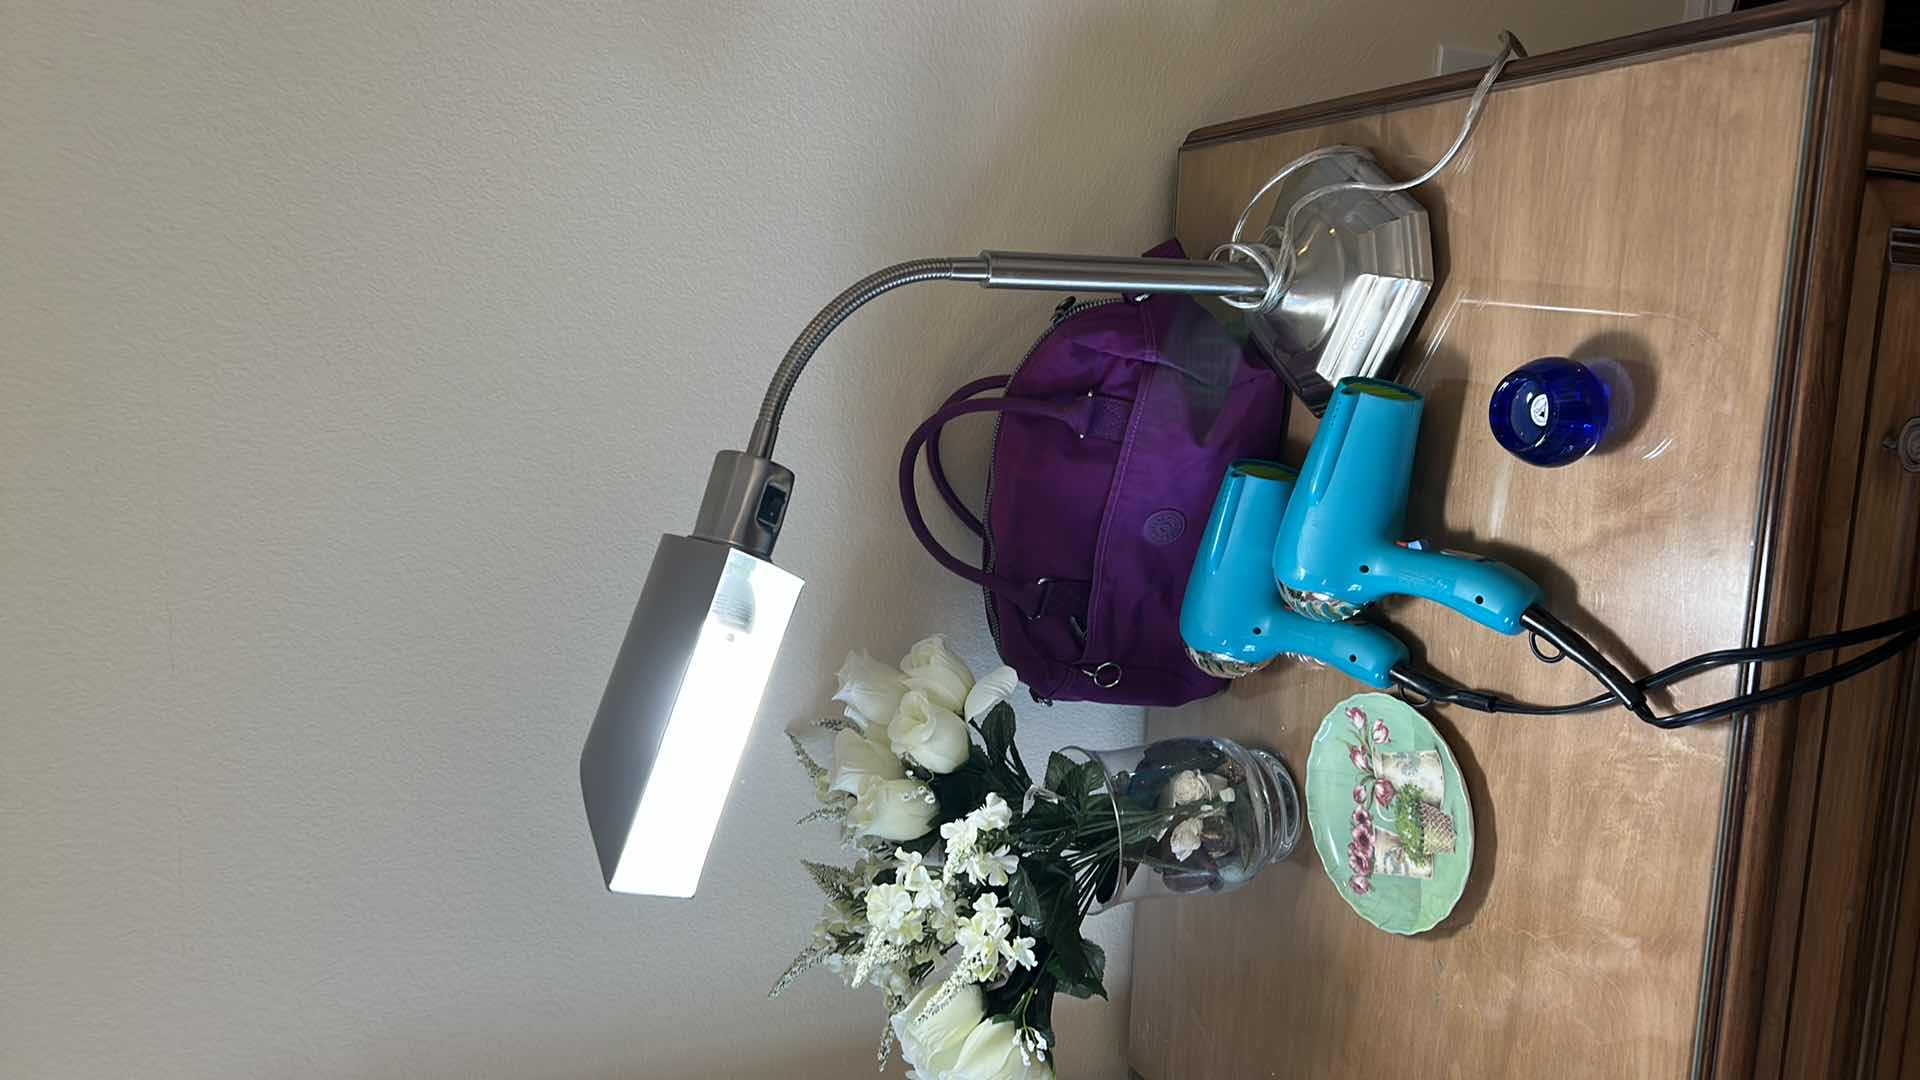 Photo 10 of MISC ASSORTMENT - PURPLE HANDBAG, VASE, TWO BLOW DYERS, LAMP AND MORE